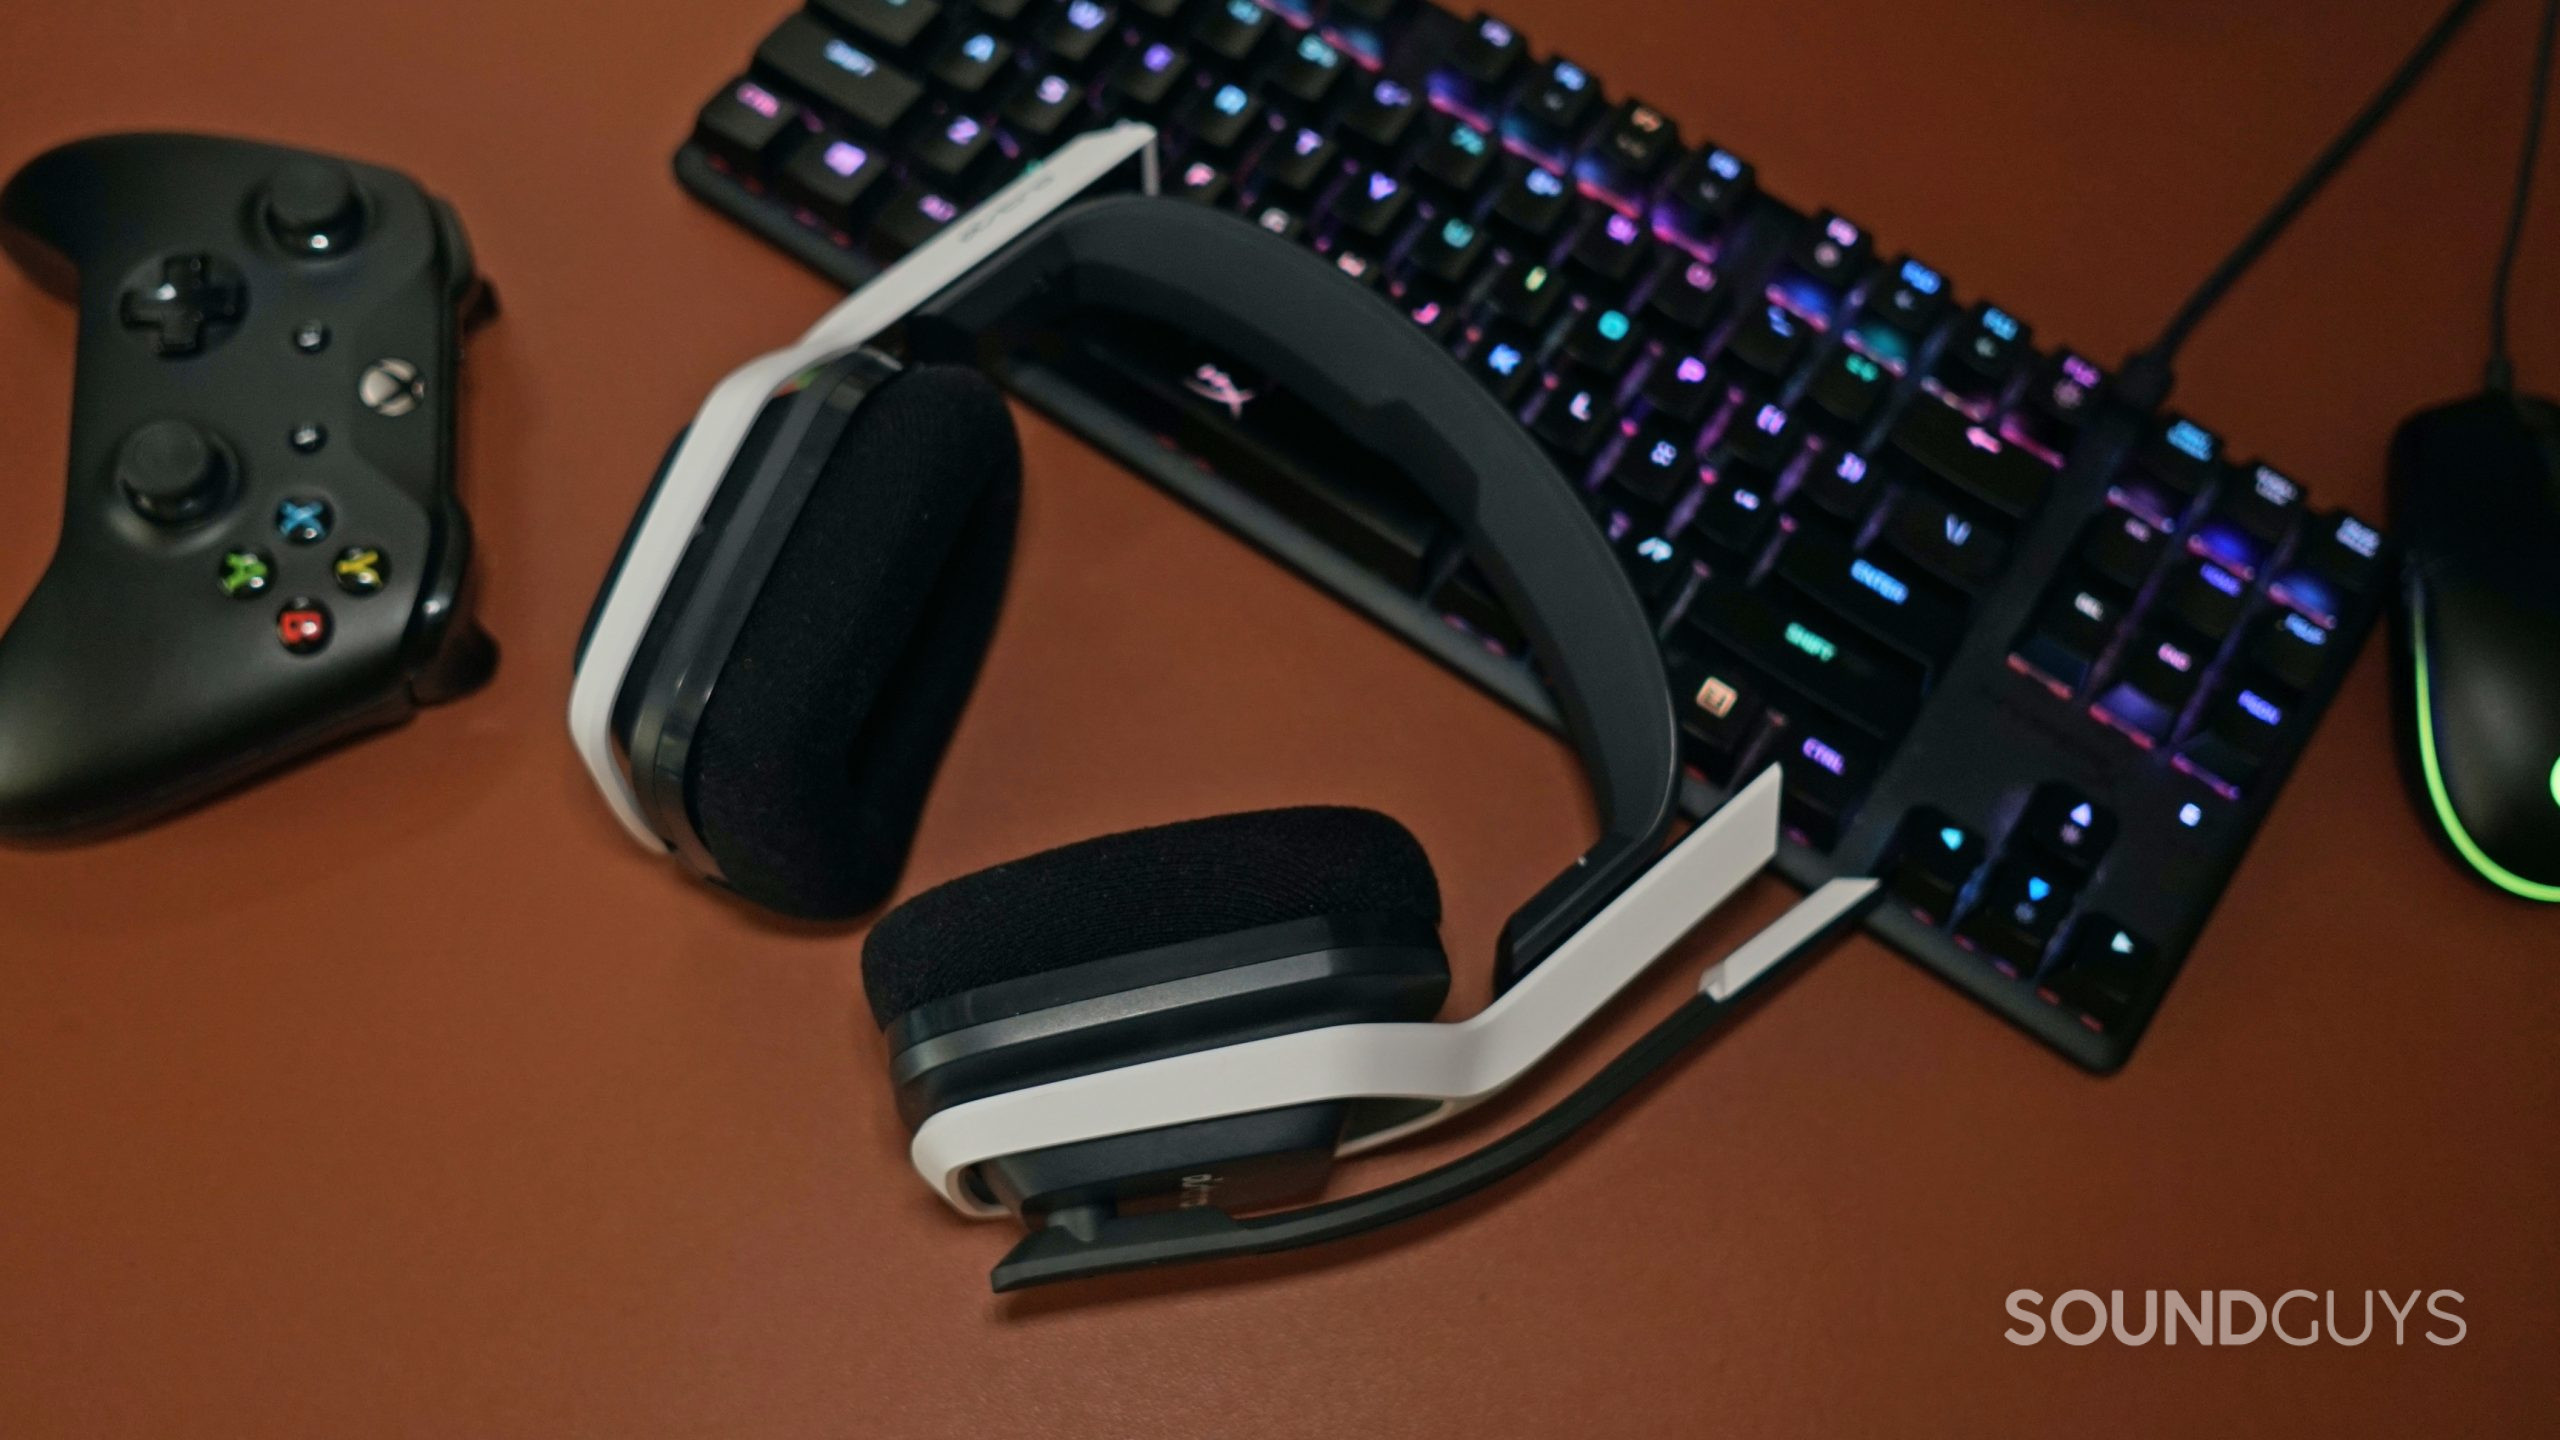 The Astro A20 gaming headset lays on a leather surface in front of a HyperX gaming keyboard, a Logitech gaming mouse, and a Microsoft Xbox controller.